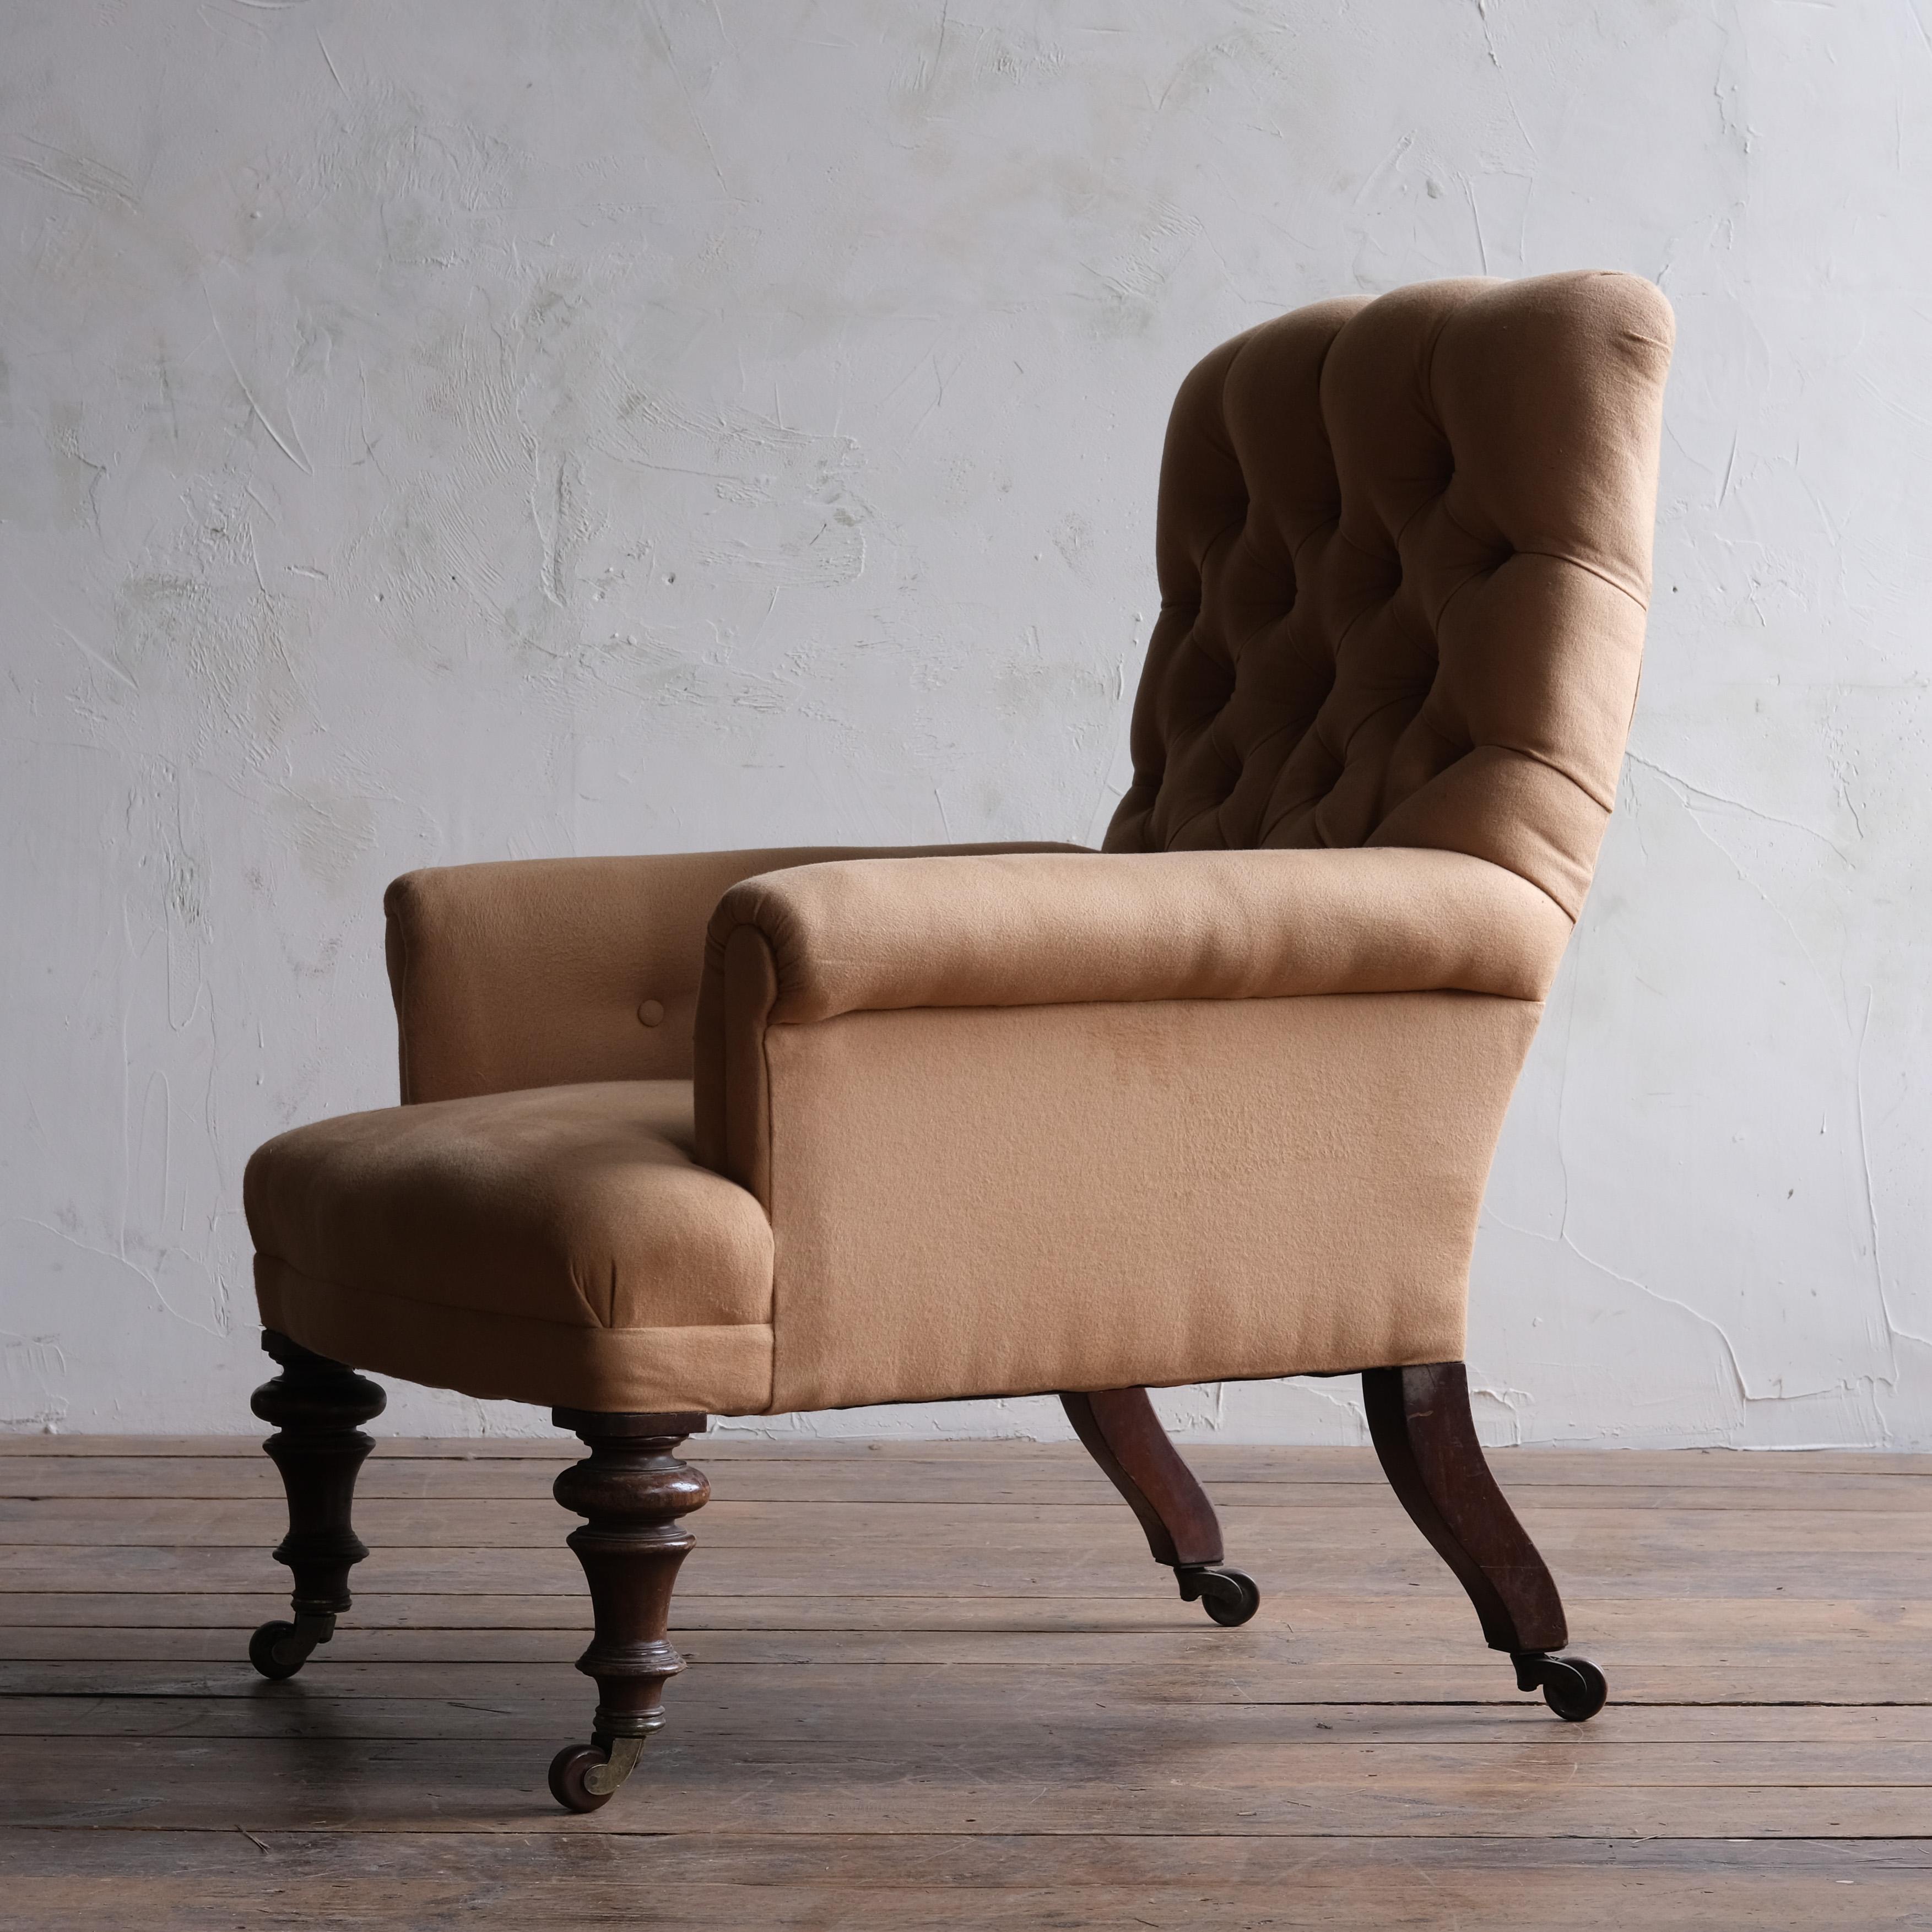 Early Victorian 19th Century English Armchair by Constantine & Co, Leeds